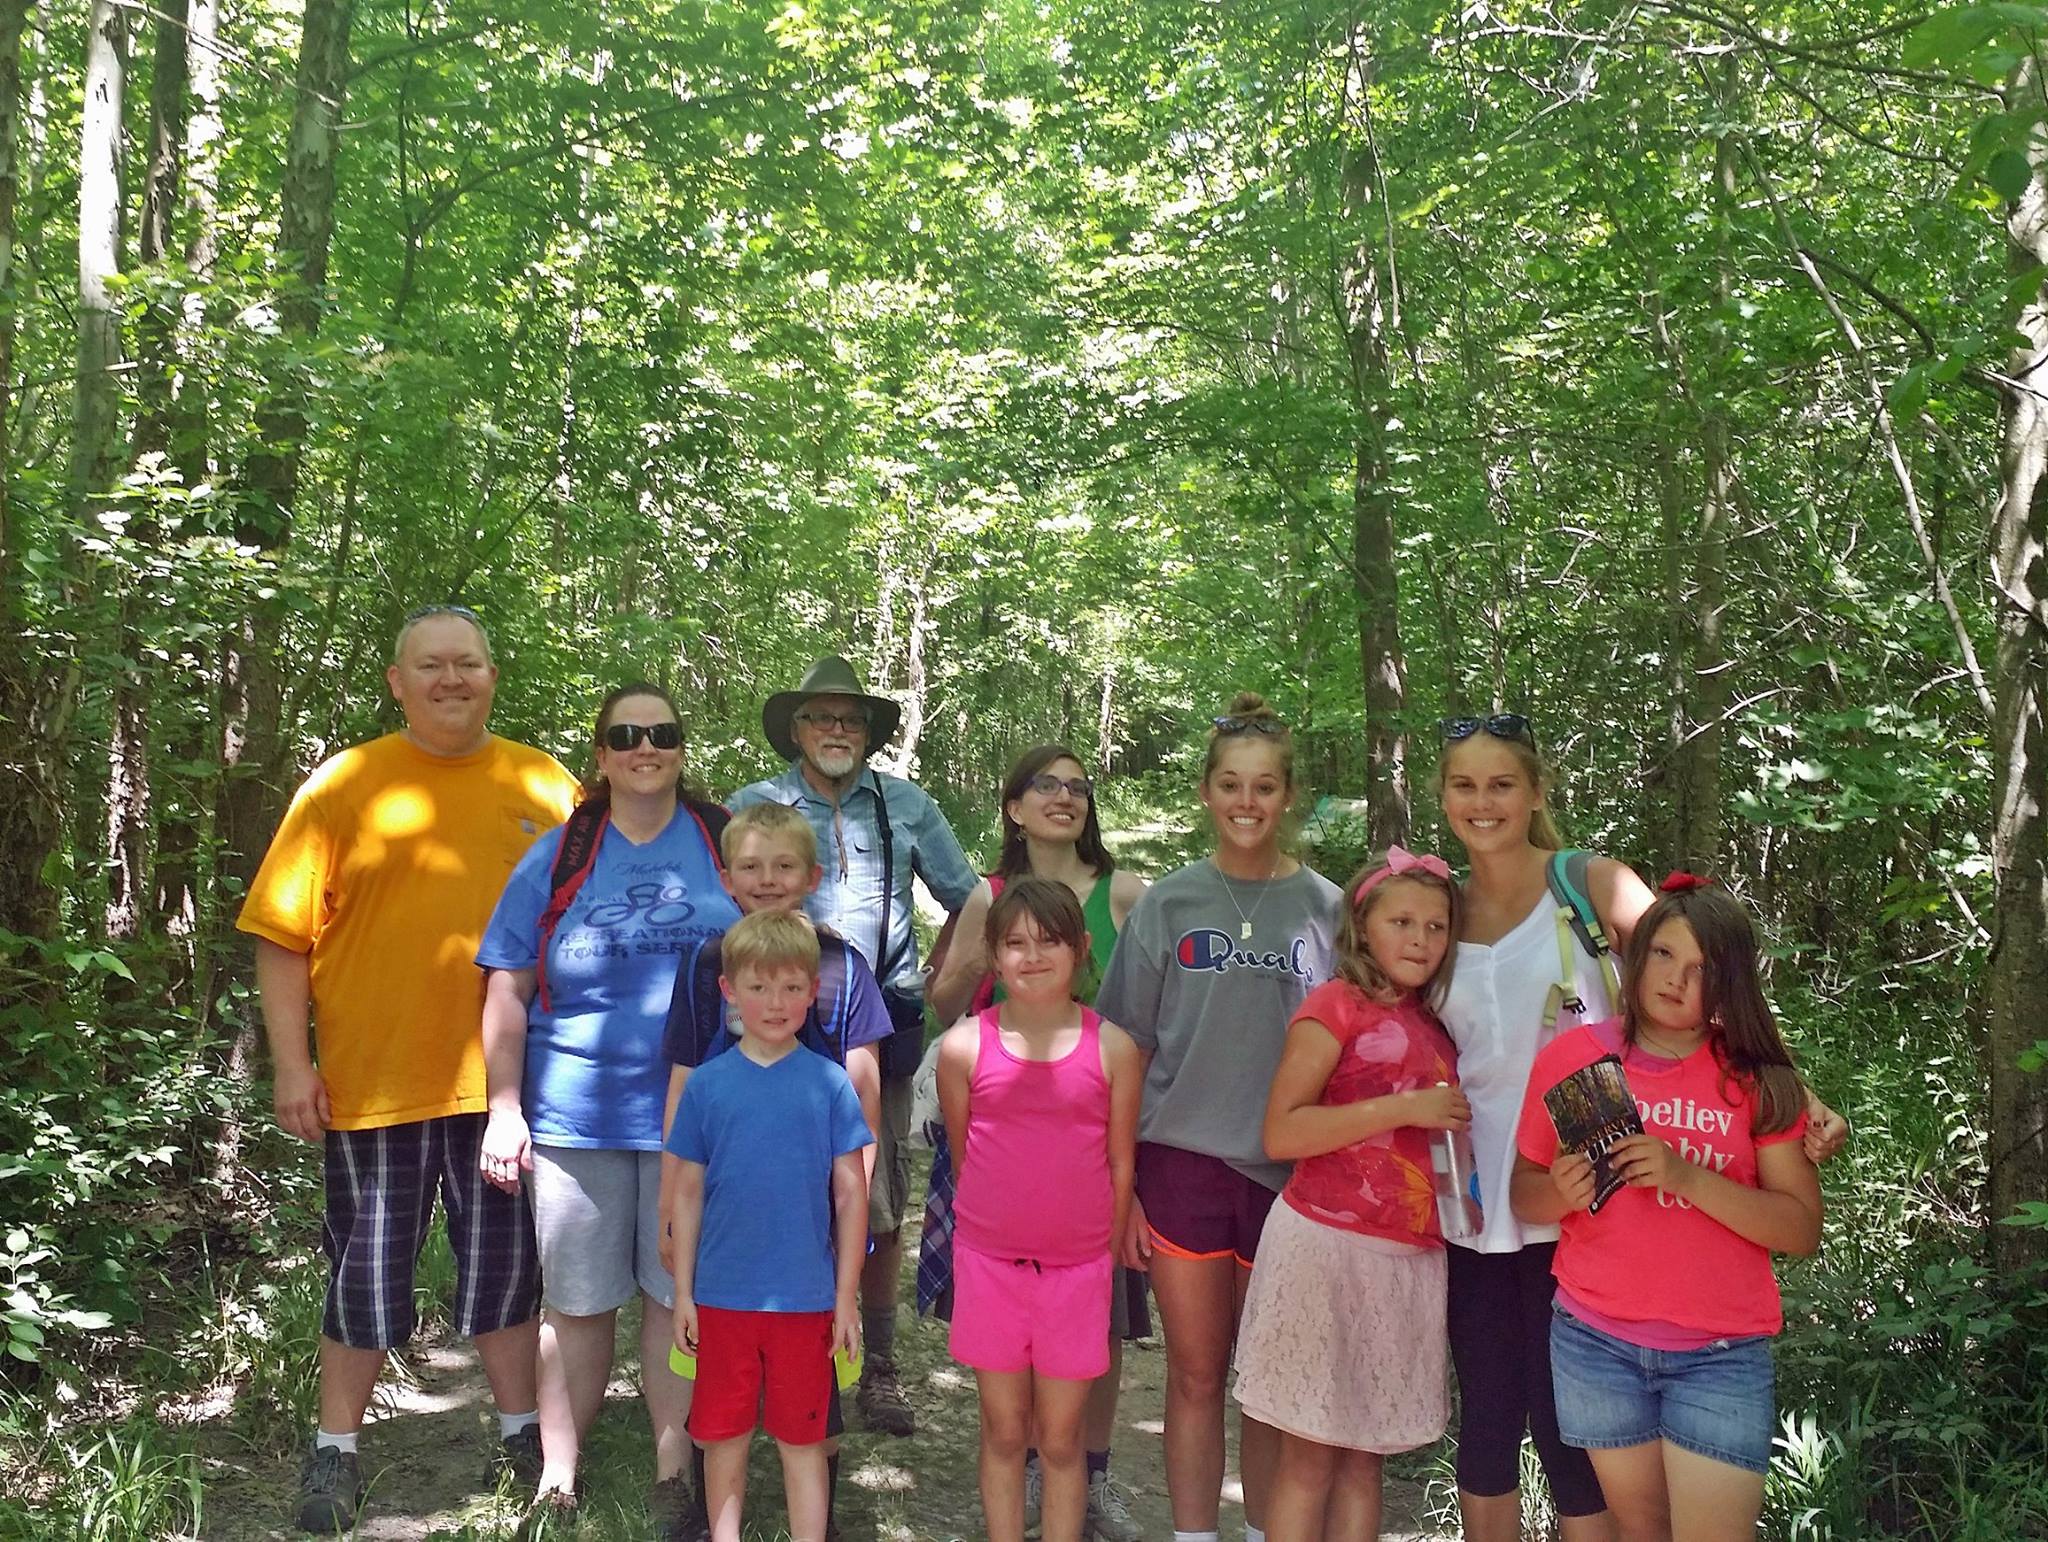 Some of our group at the family hike